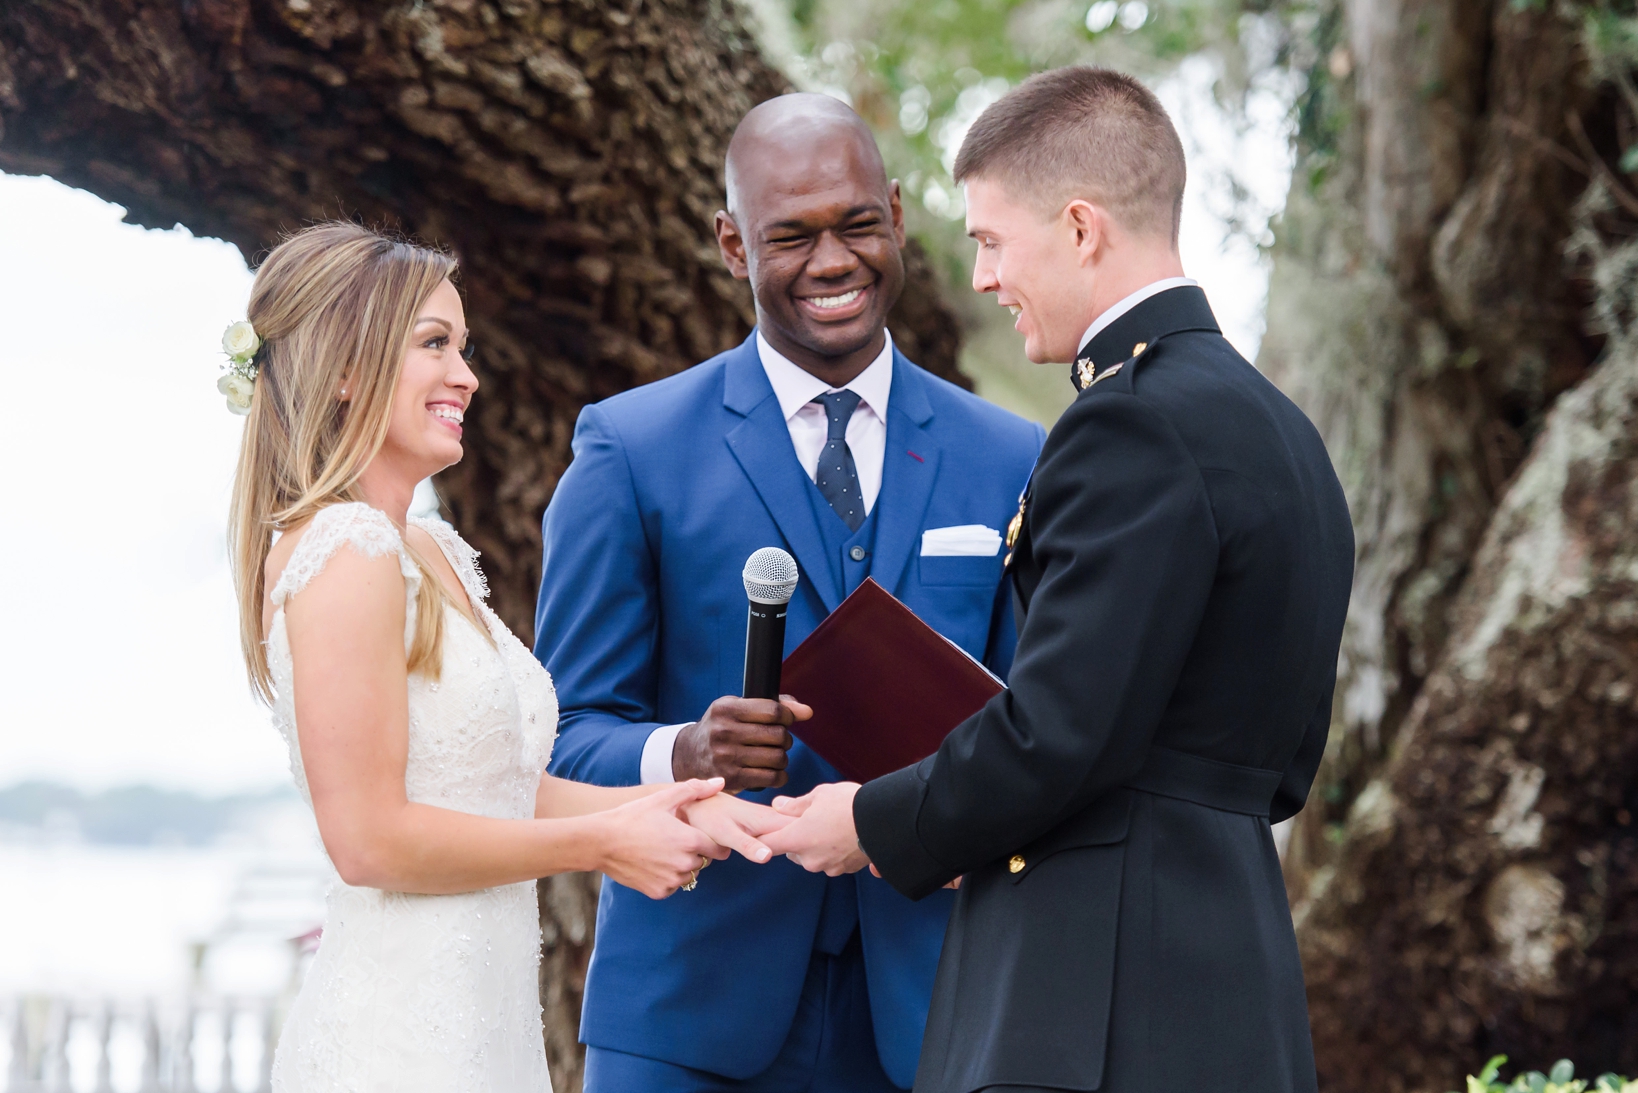 Exchanging vows with their friend as their officiant 